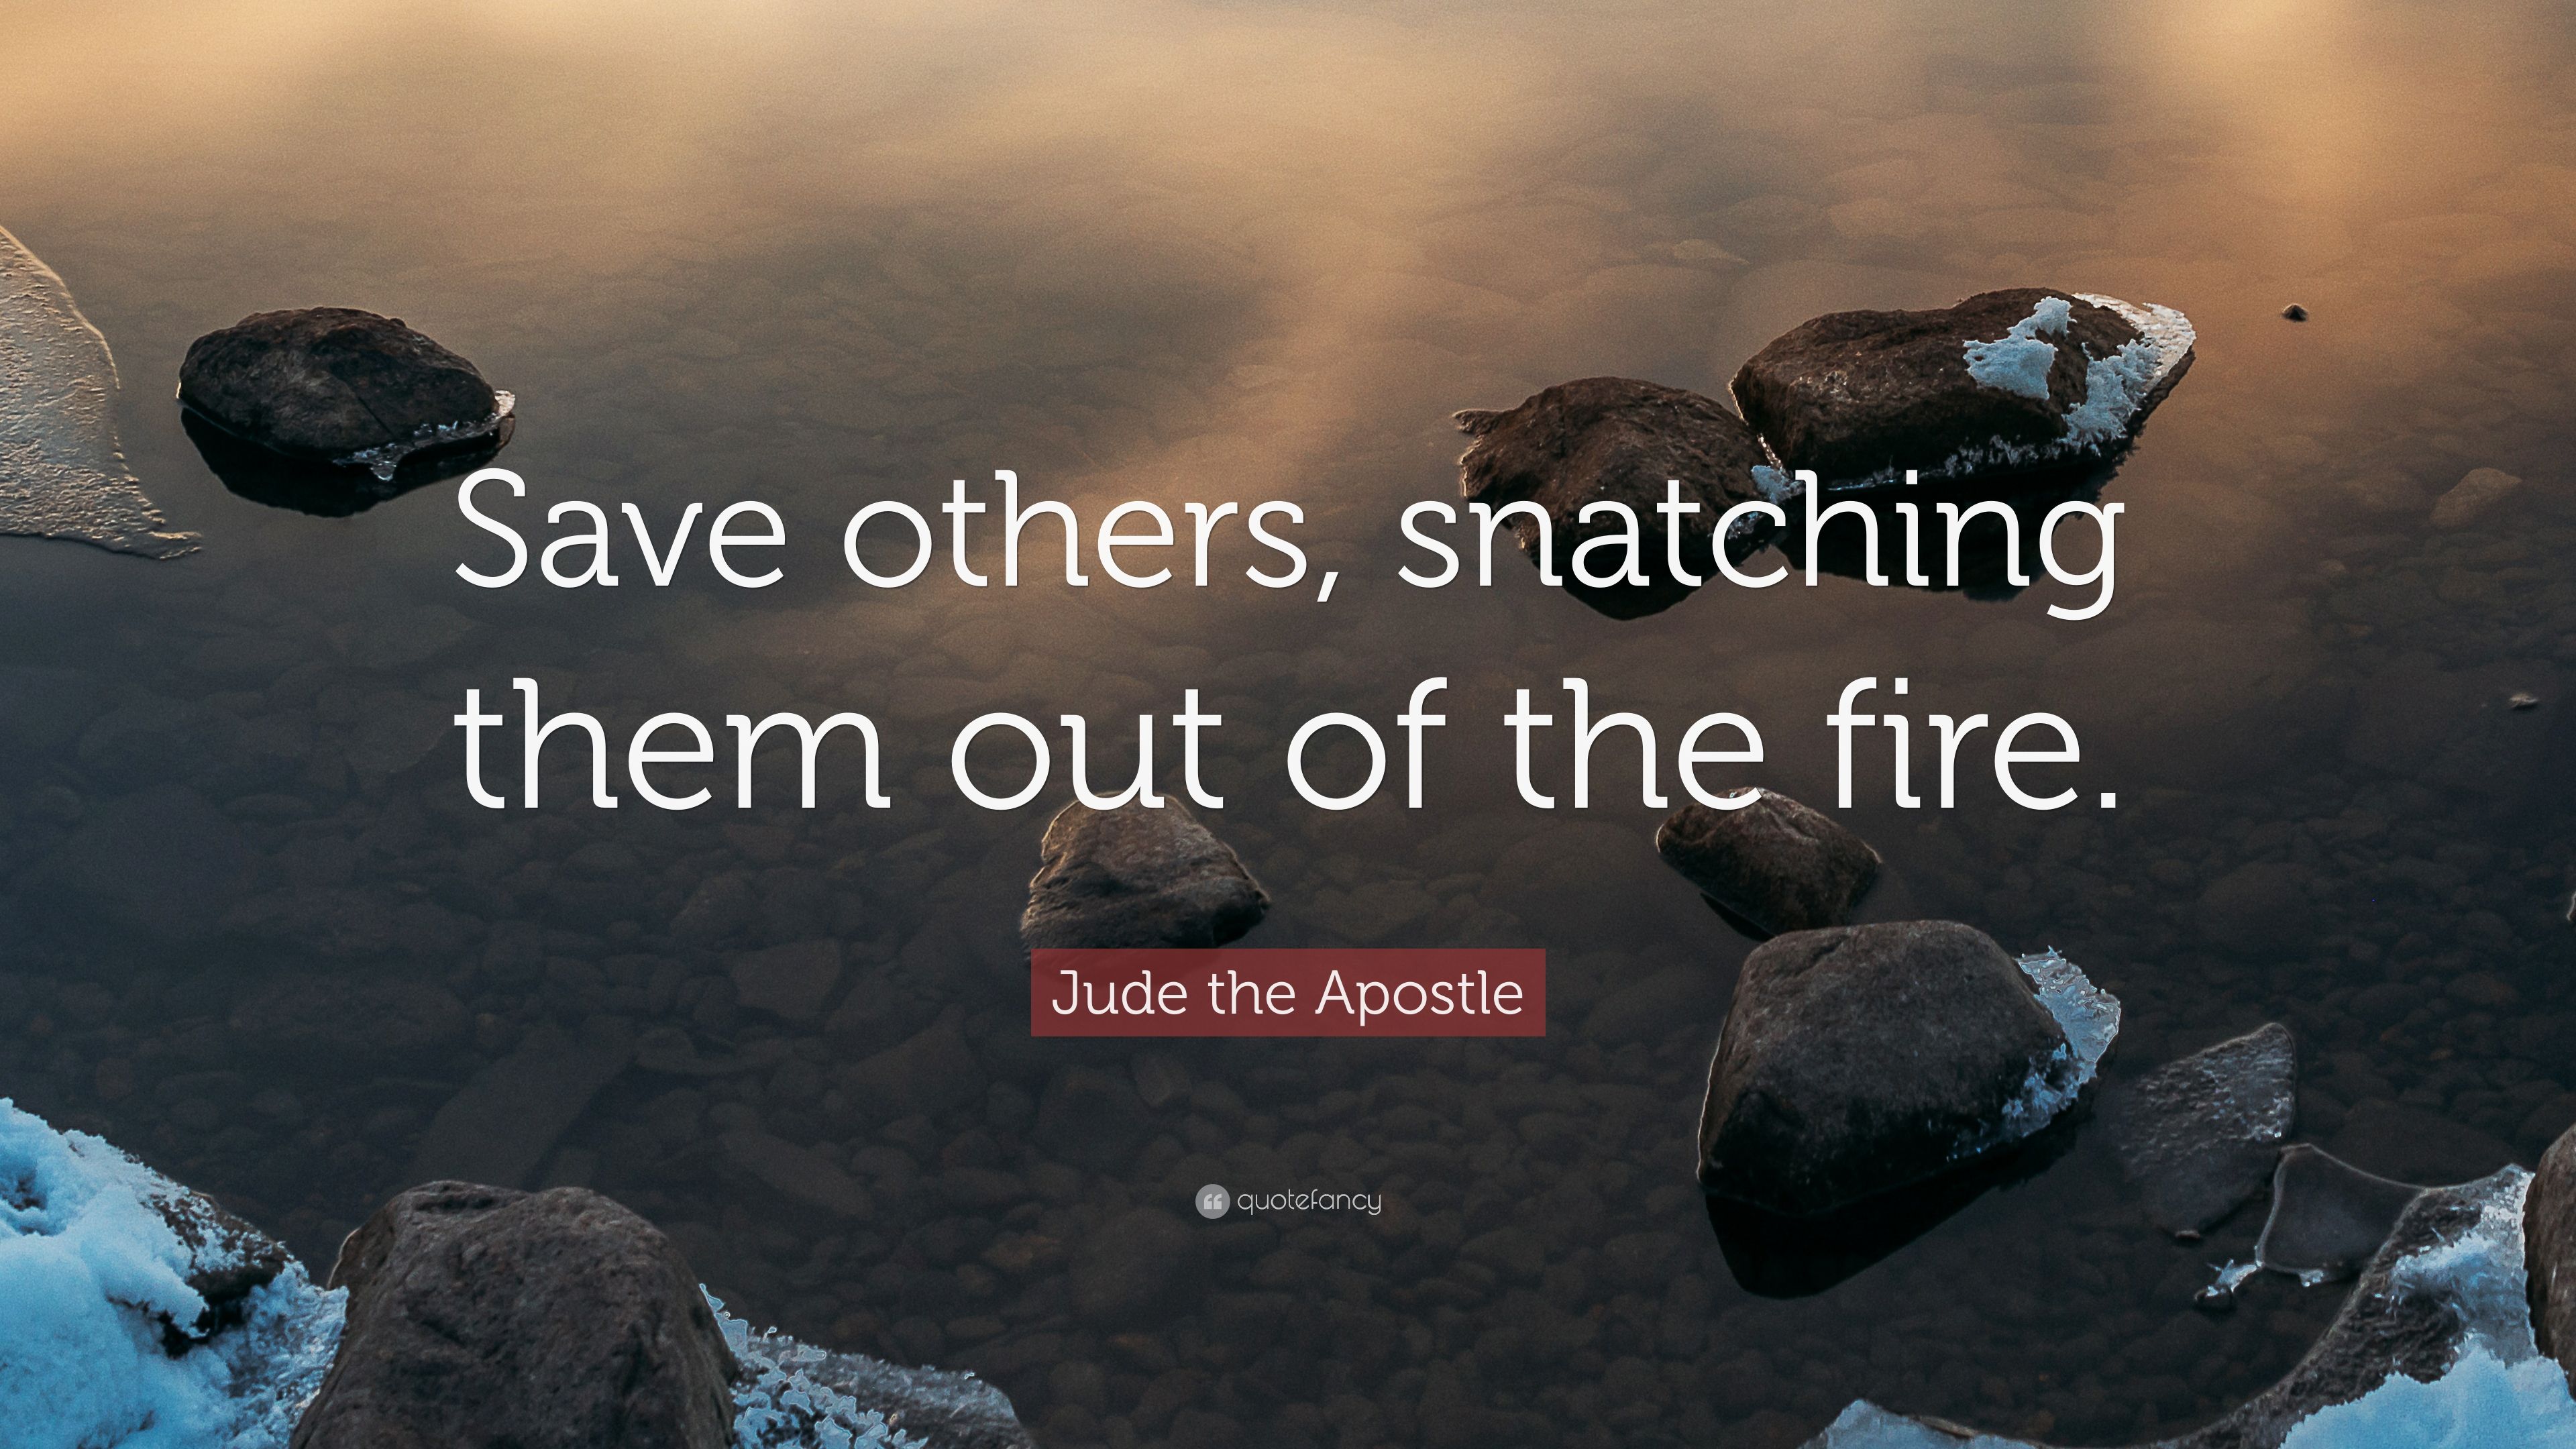 Jude the Apostle Quote: “Save others, snatching them out of the fire.” (7 wallpaper)